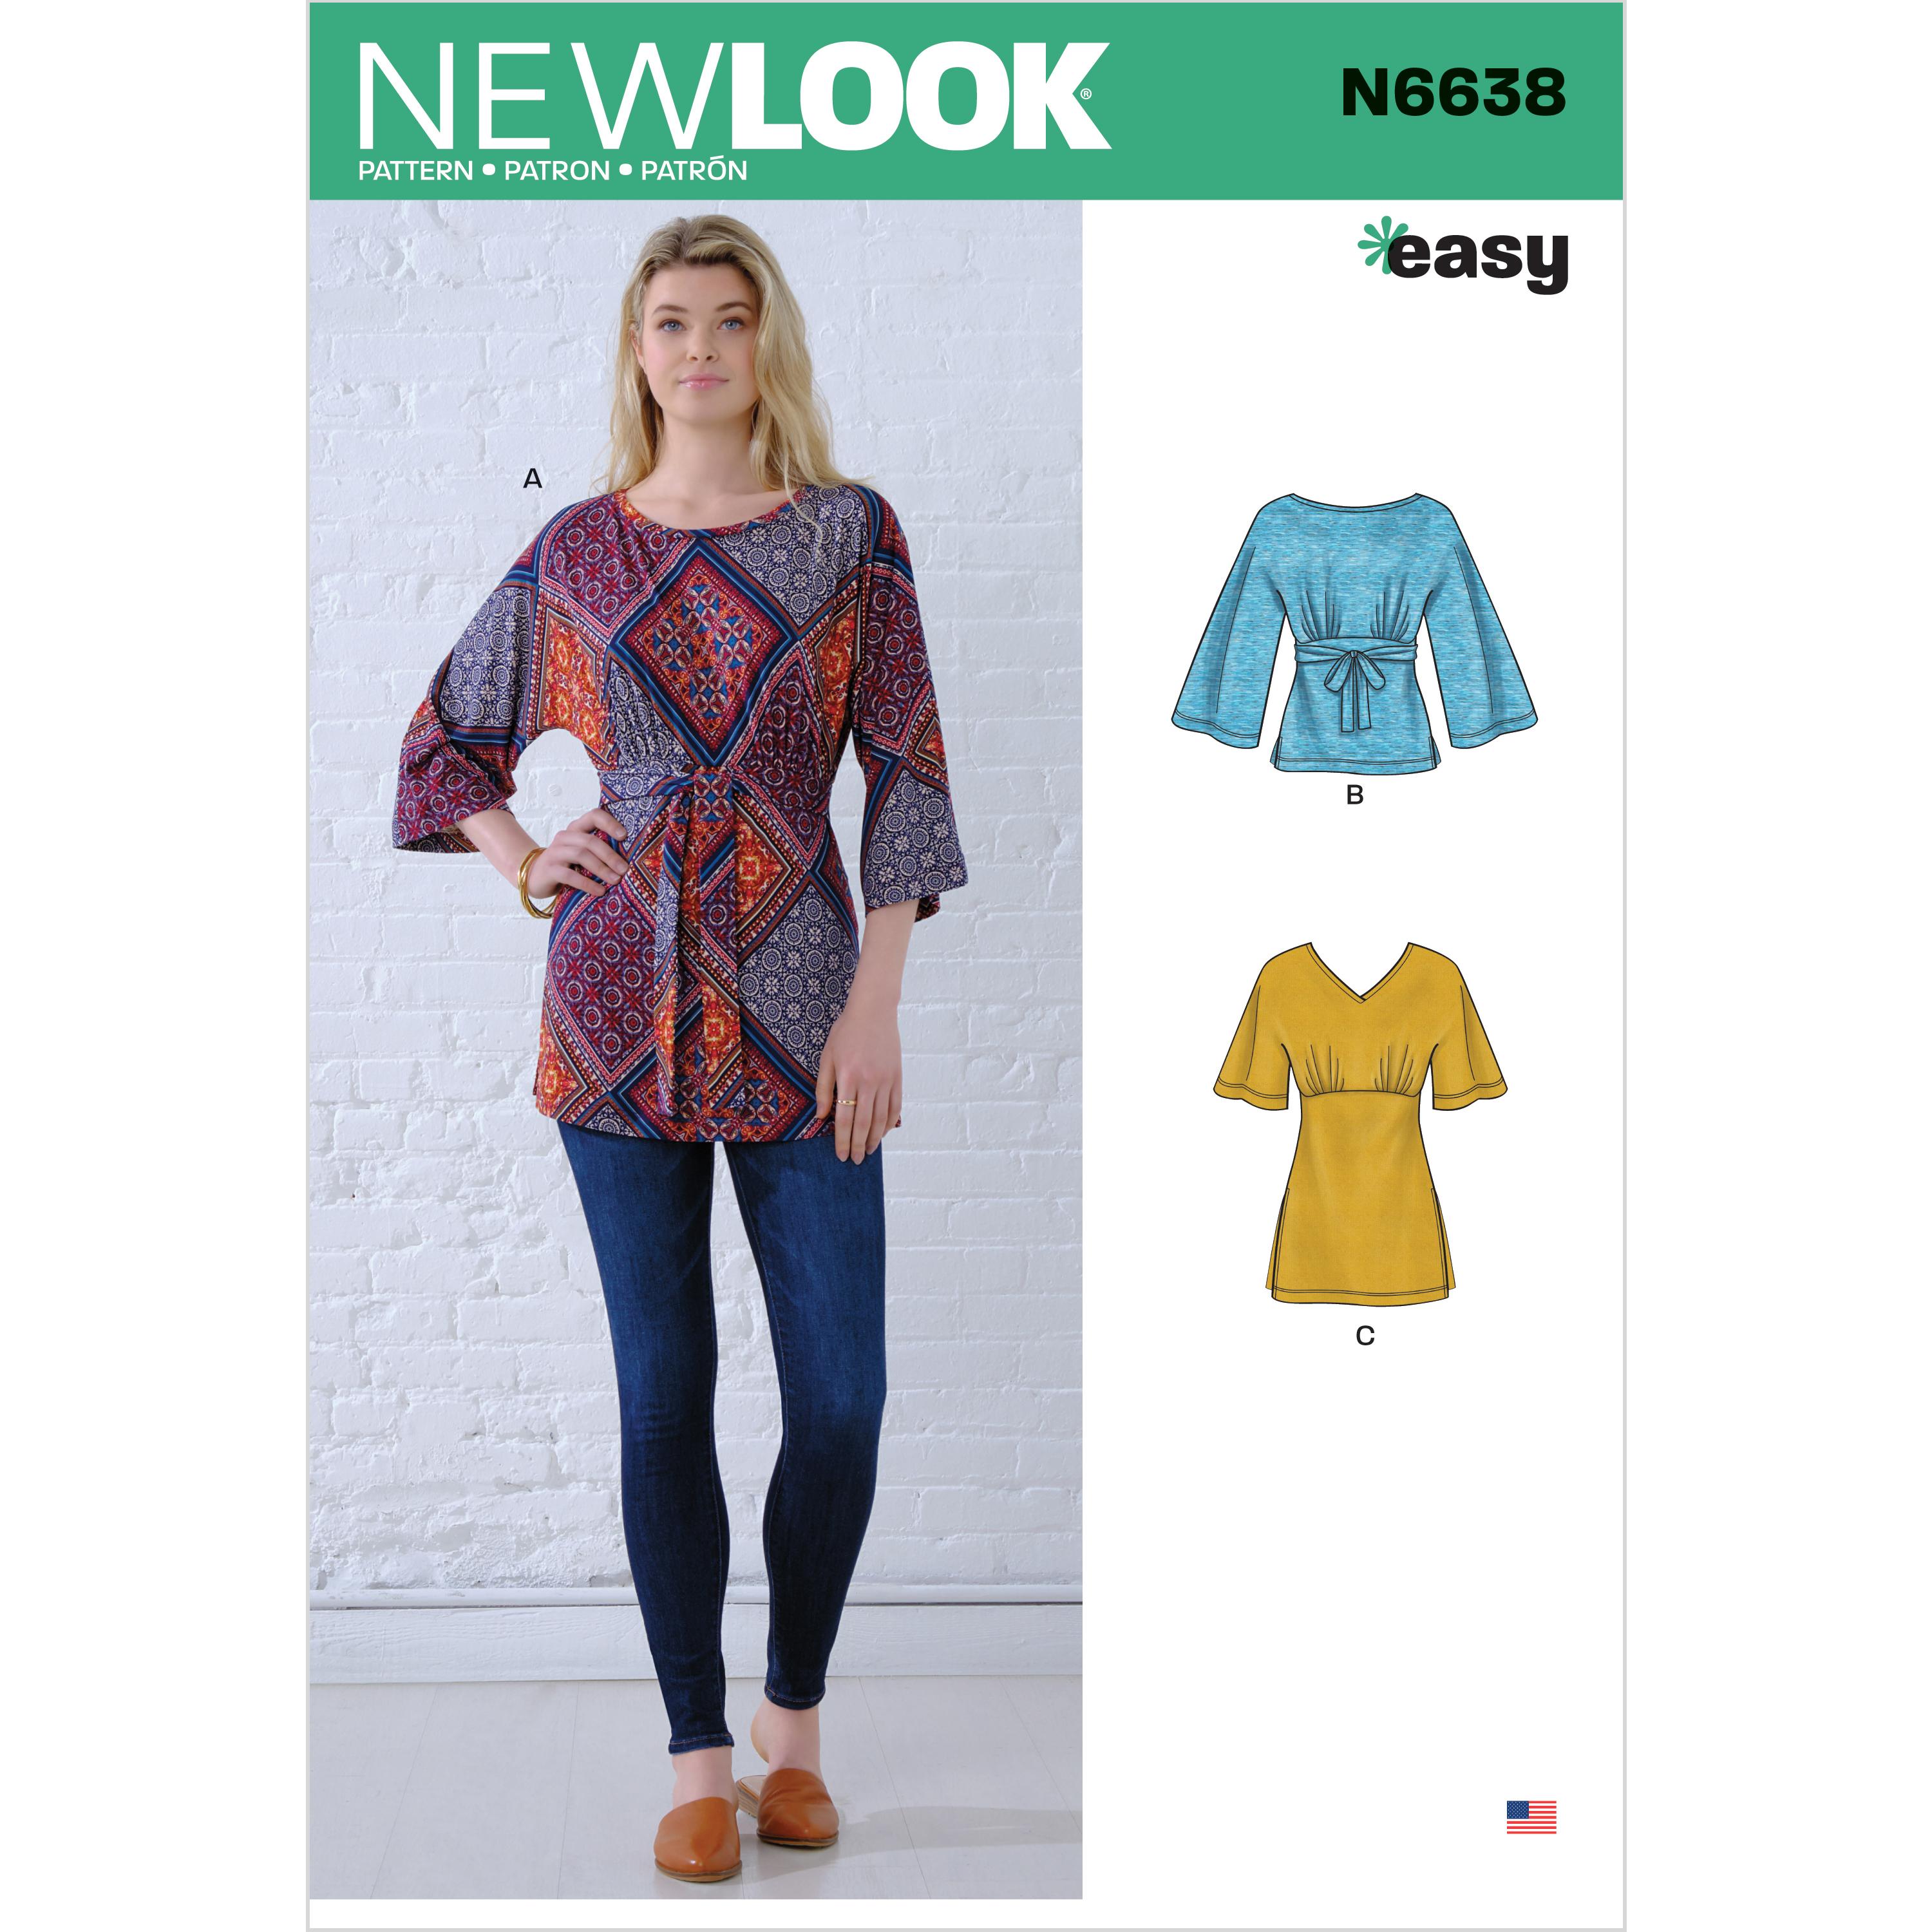 NewLook Sewing Pattern N6638 Misses' Knit Tops